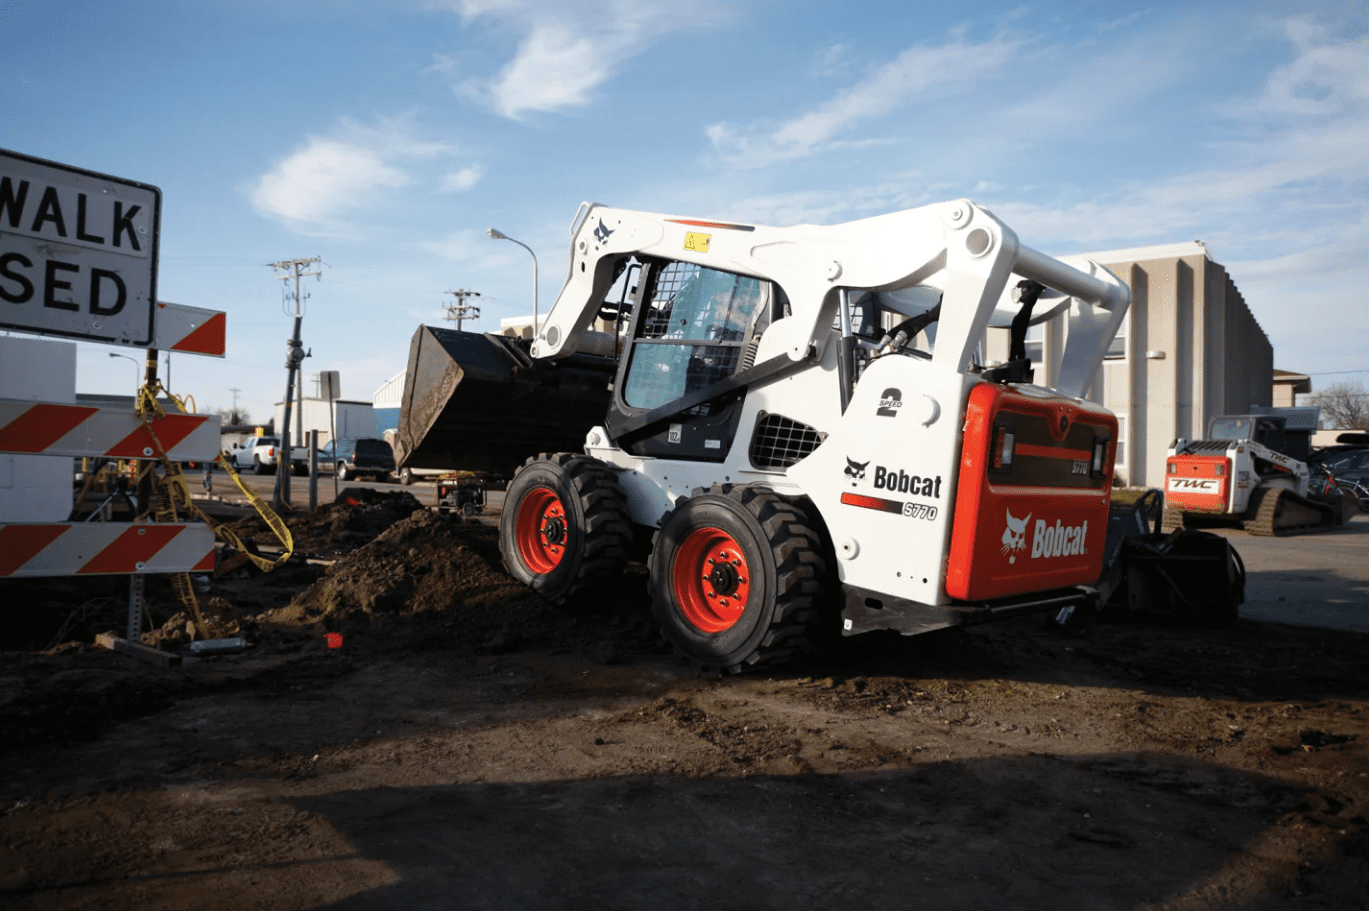 Browse Specs and more for the Bobcat S770 Skid-Steer Loader - Bobcat of Indy